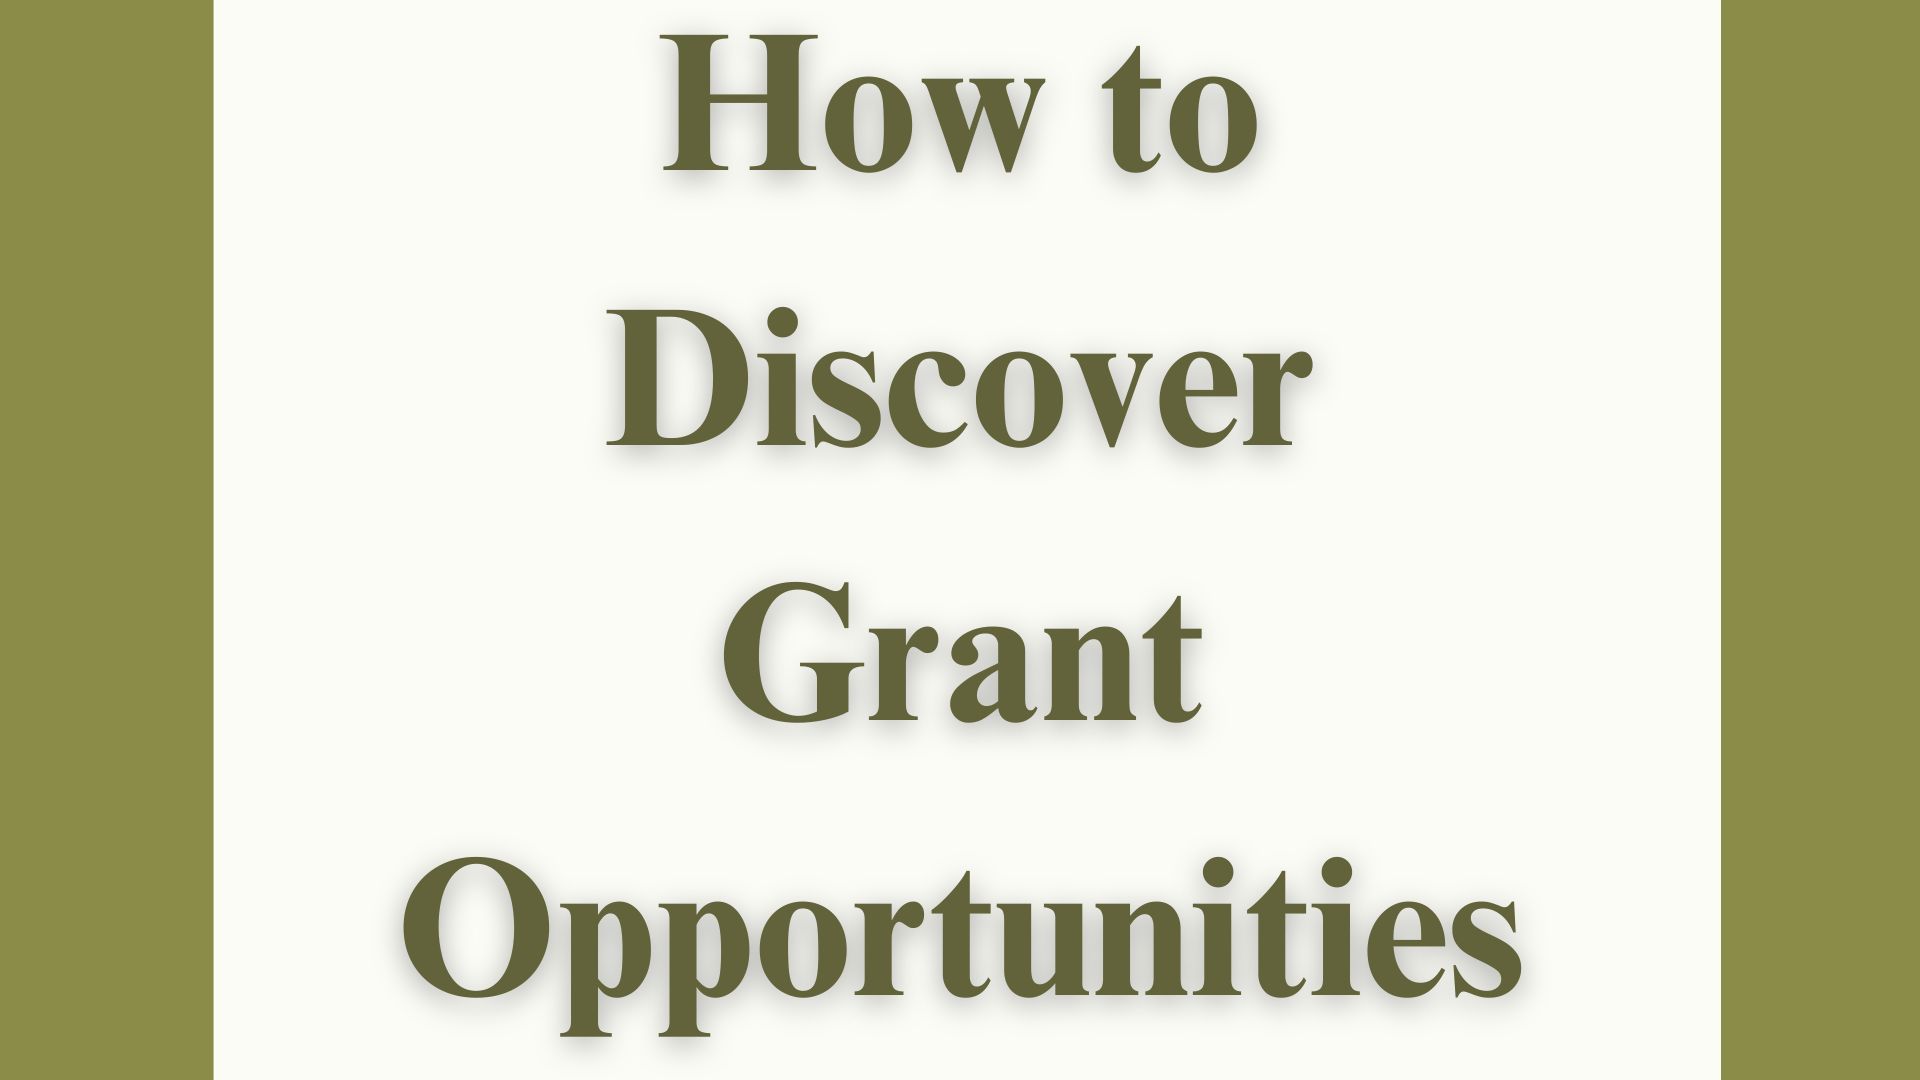 How to Discover grant opportunities